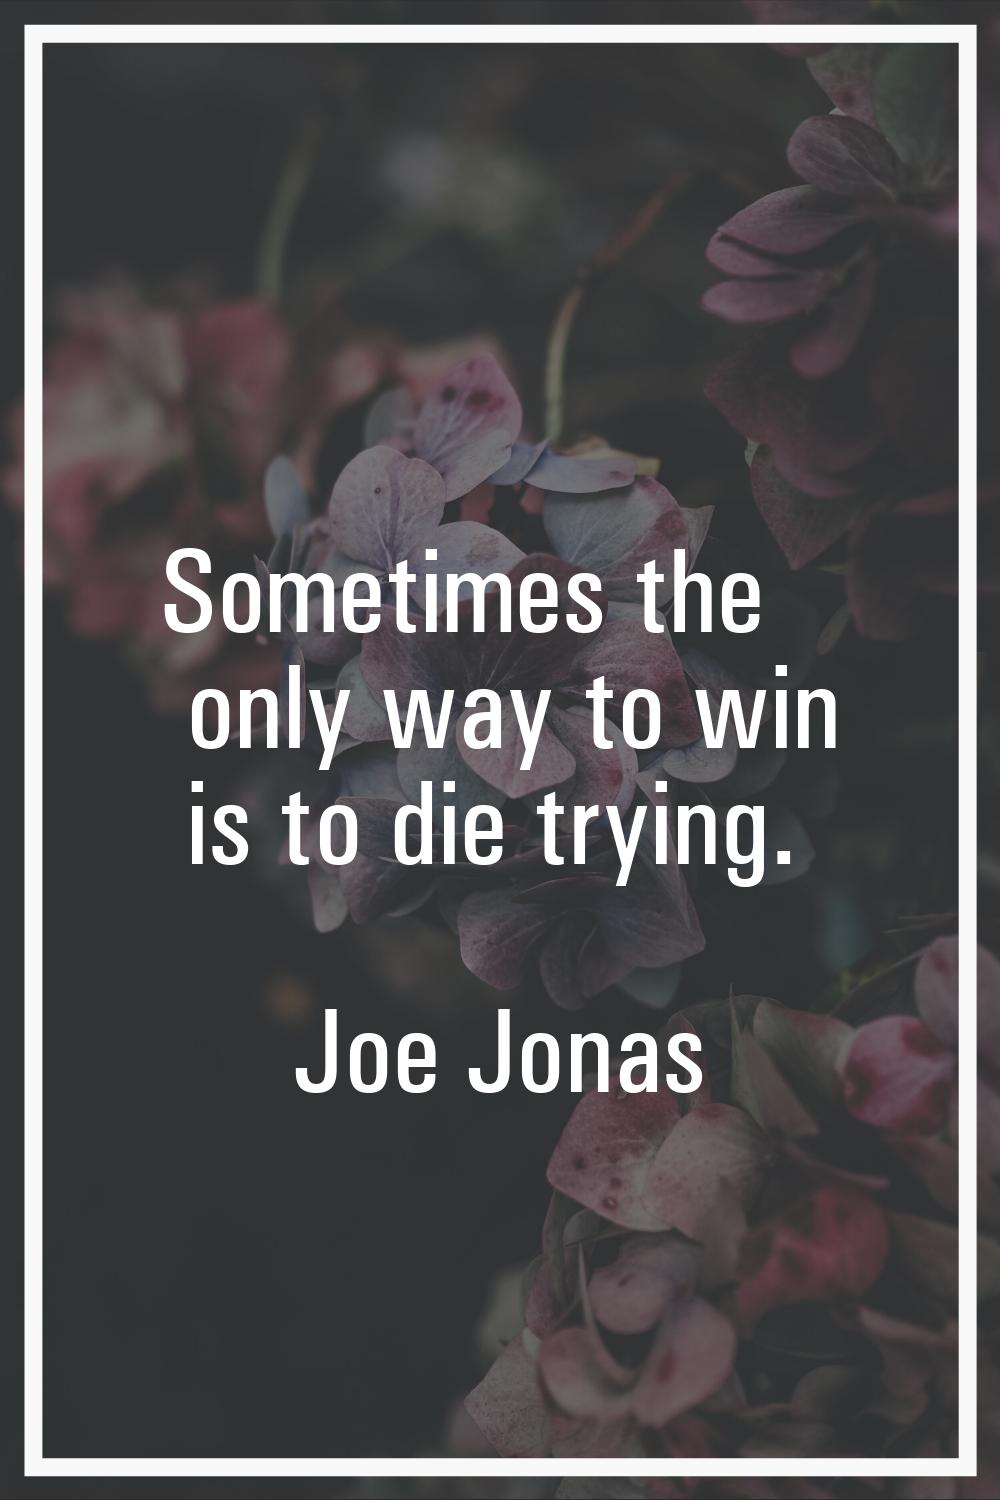 Sometimes the only way to win is to die trying.